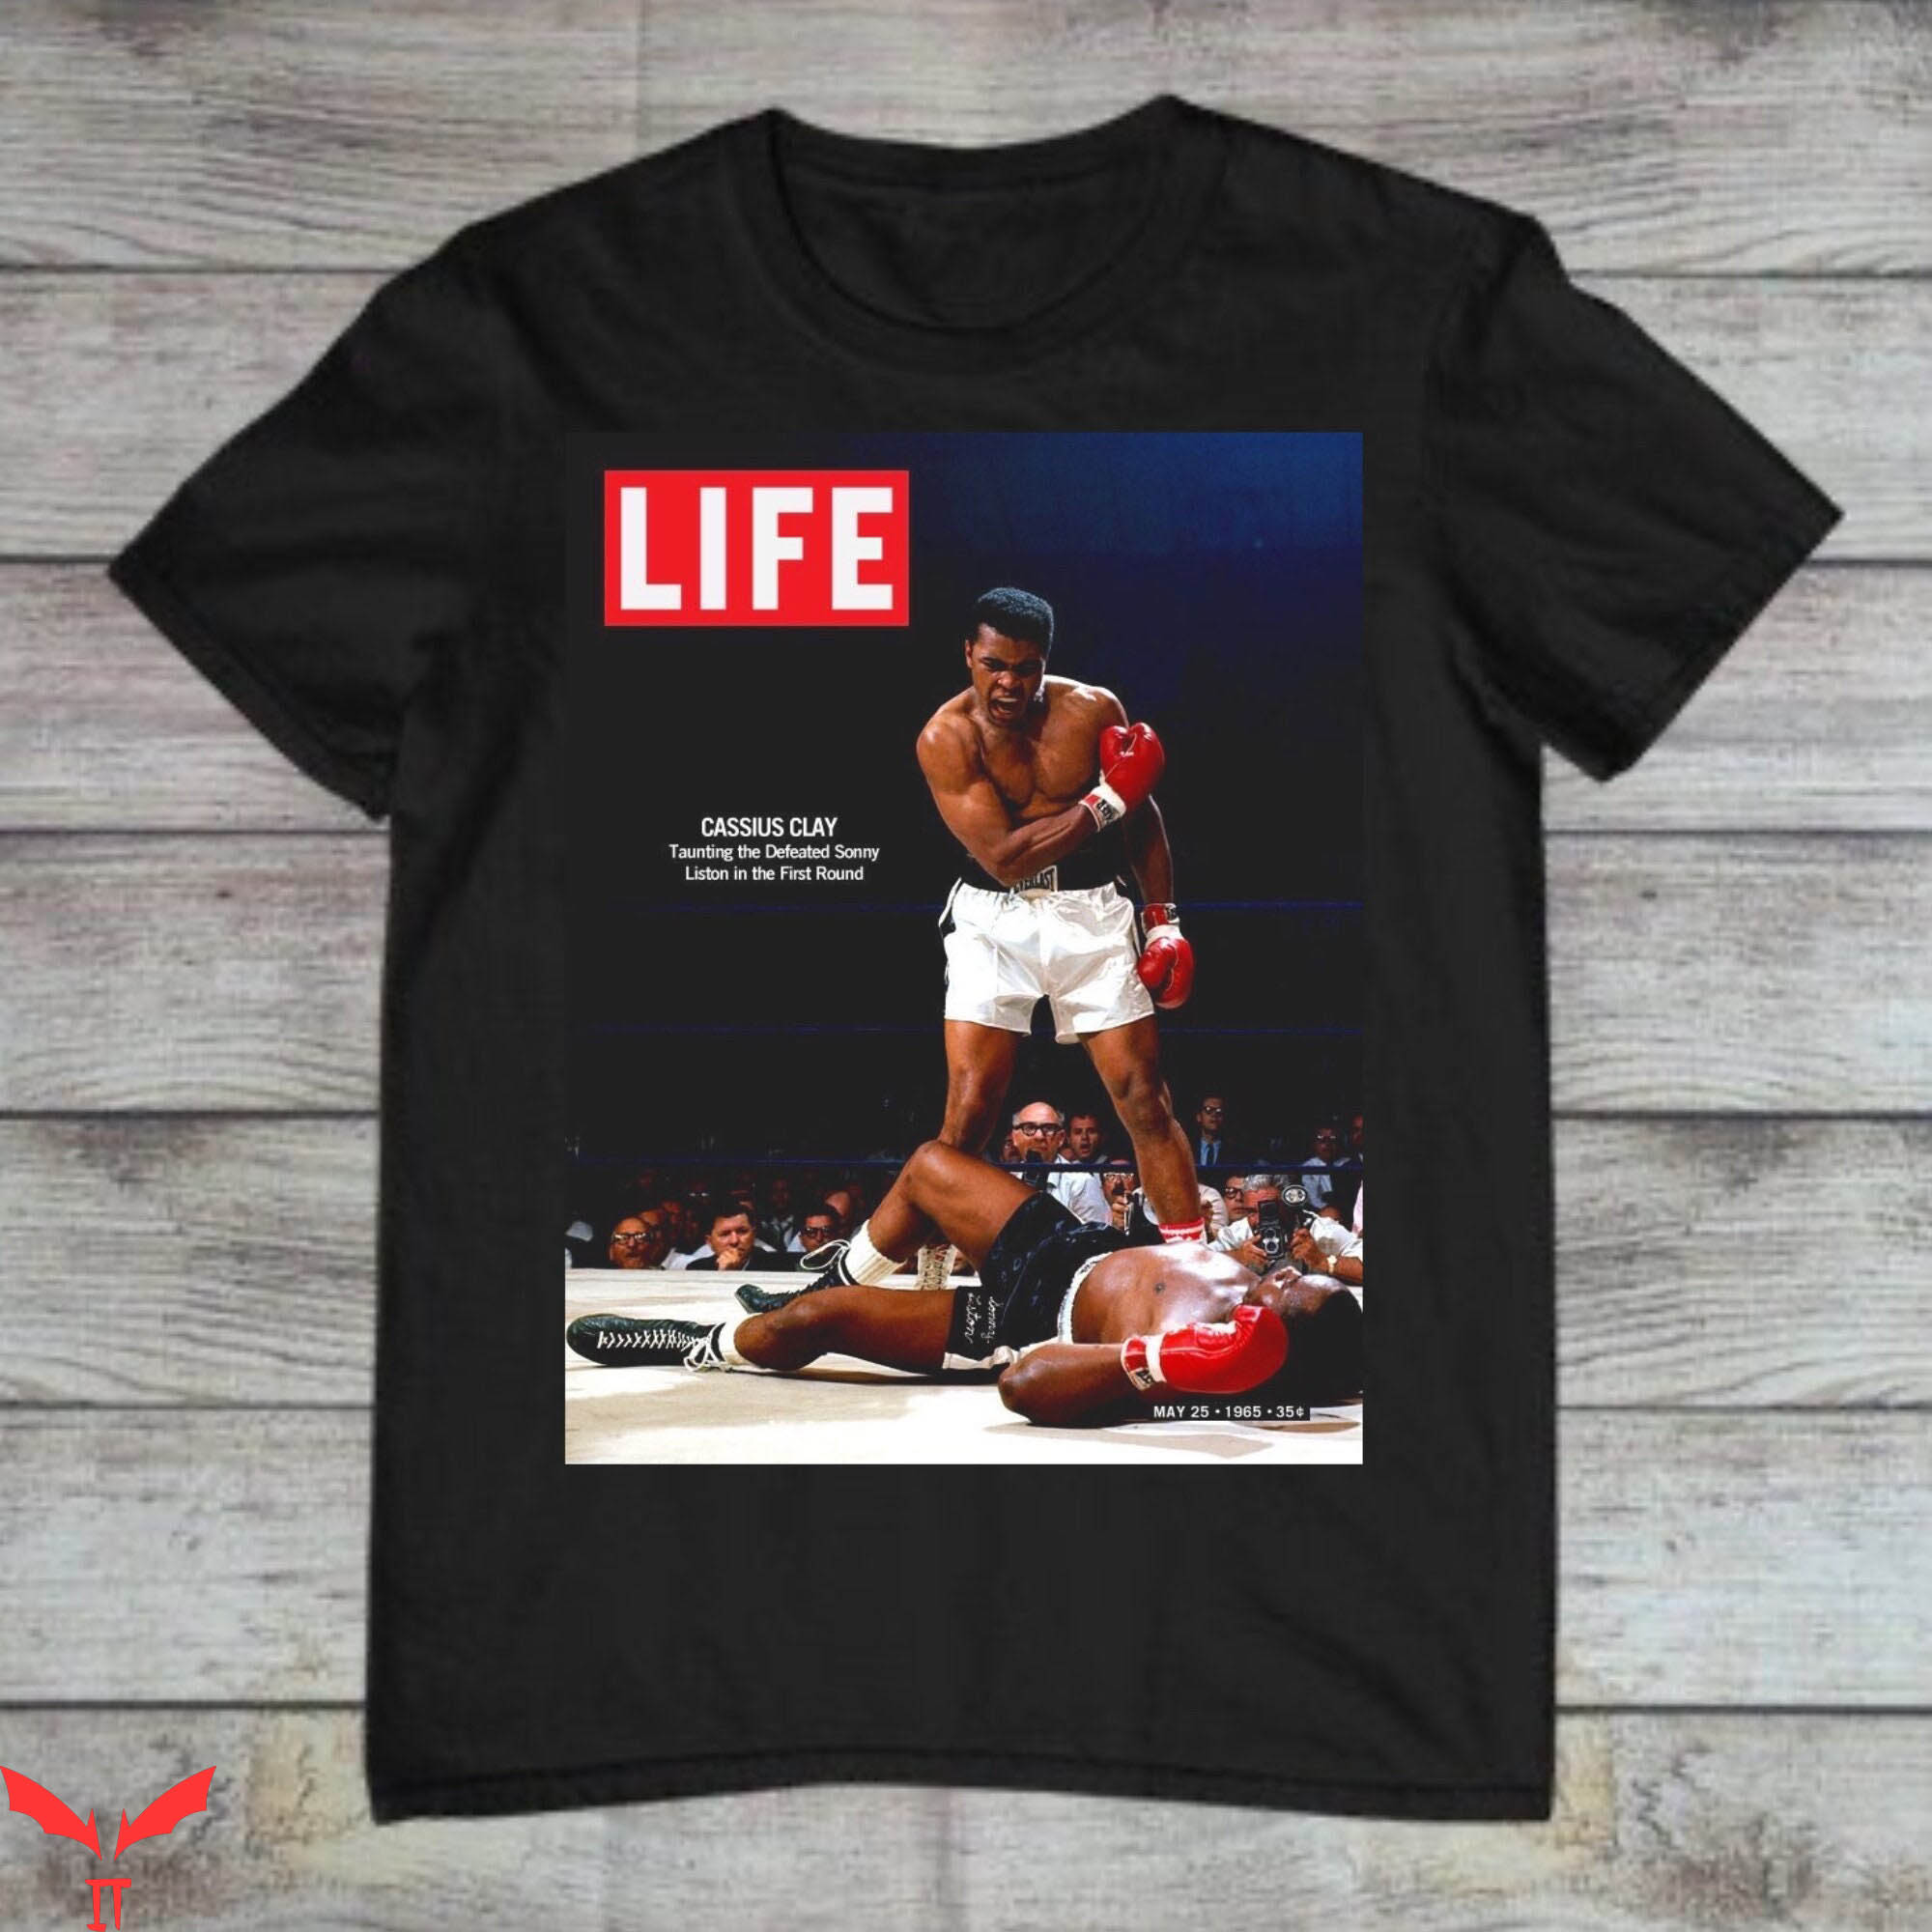 Cassius Clay T-Shirt Boxing Heavyweight Champ Trendy Tee